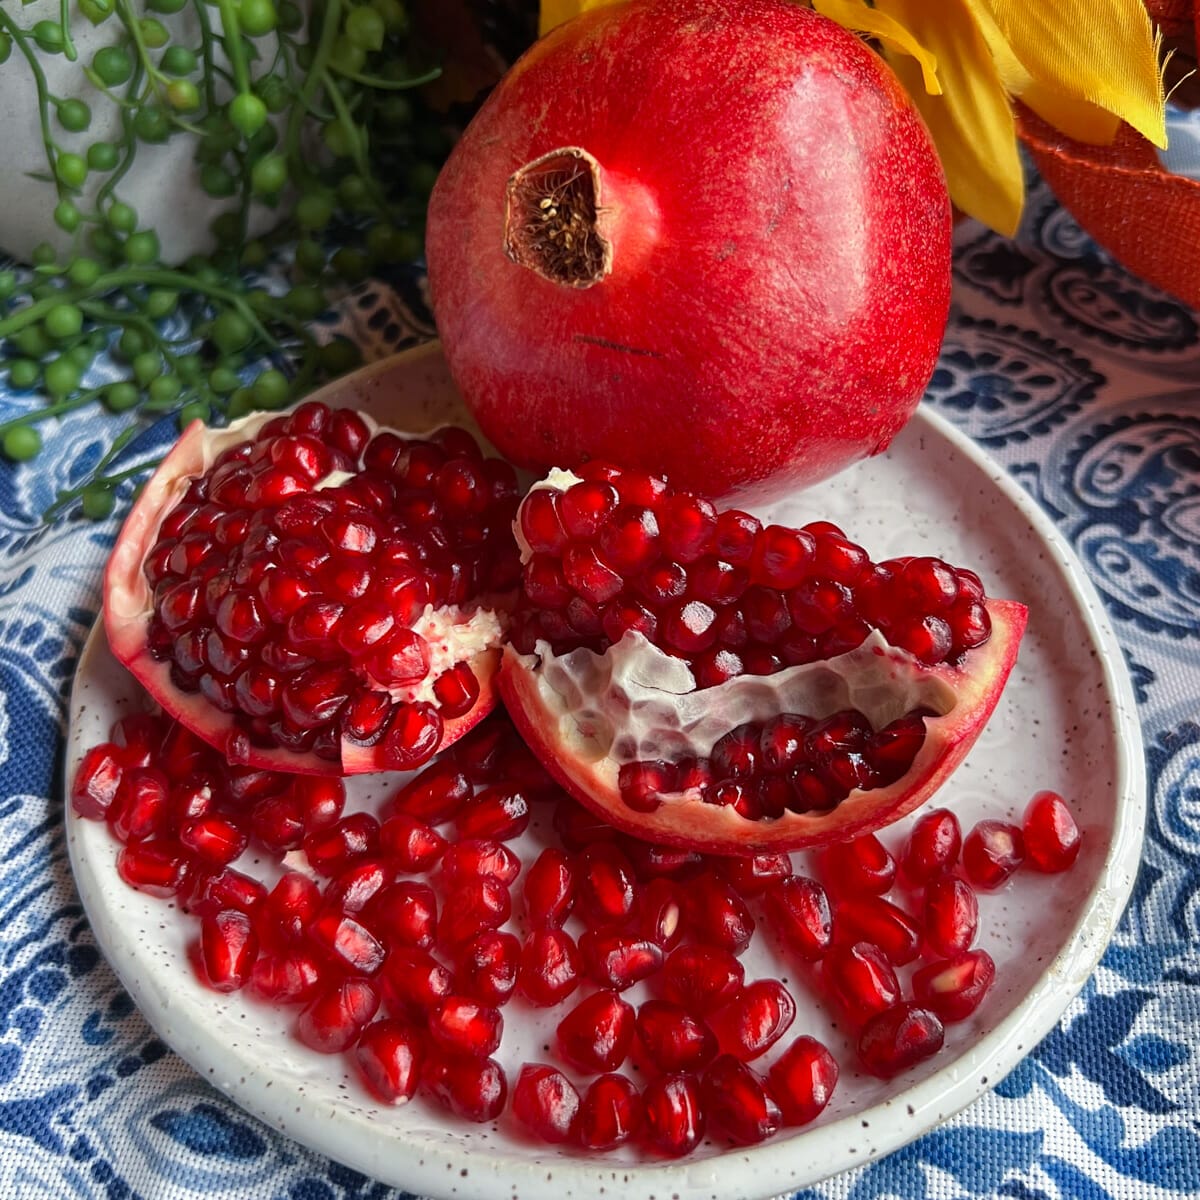 How to Select, Store, Freeze and Cut Pomegranates